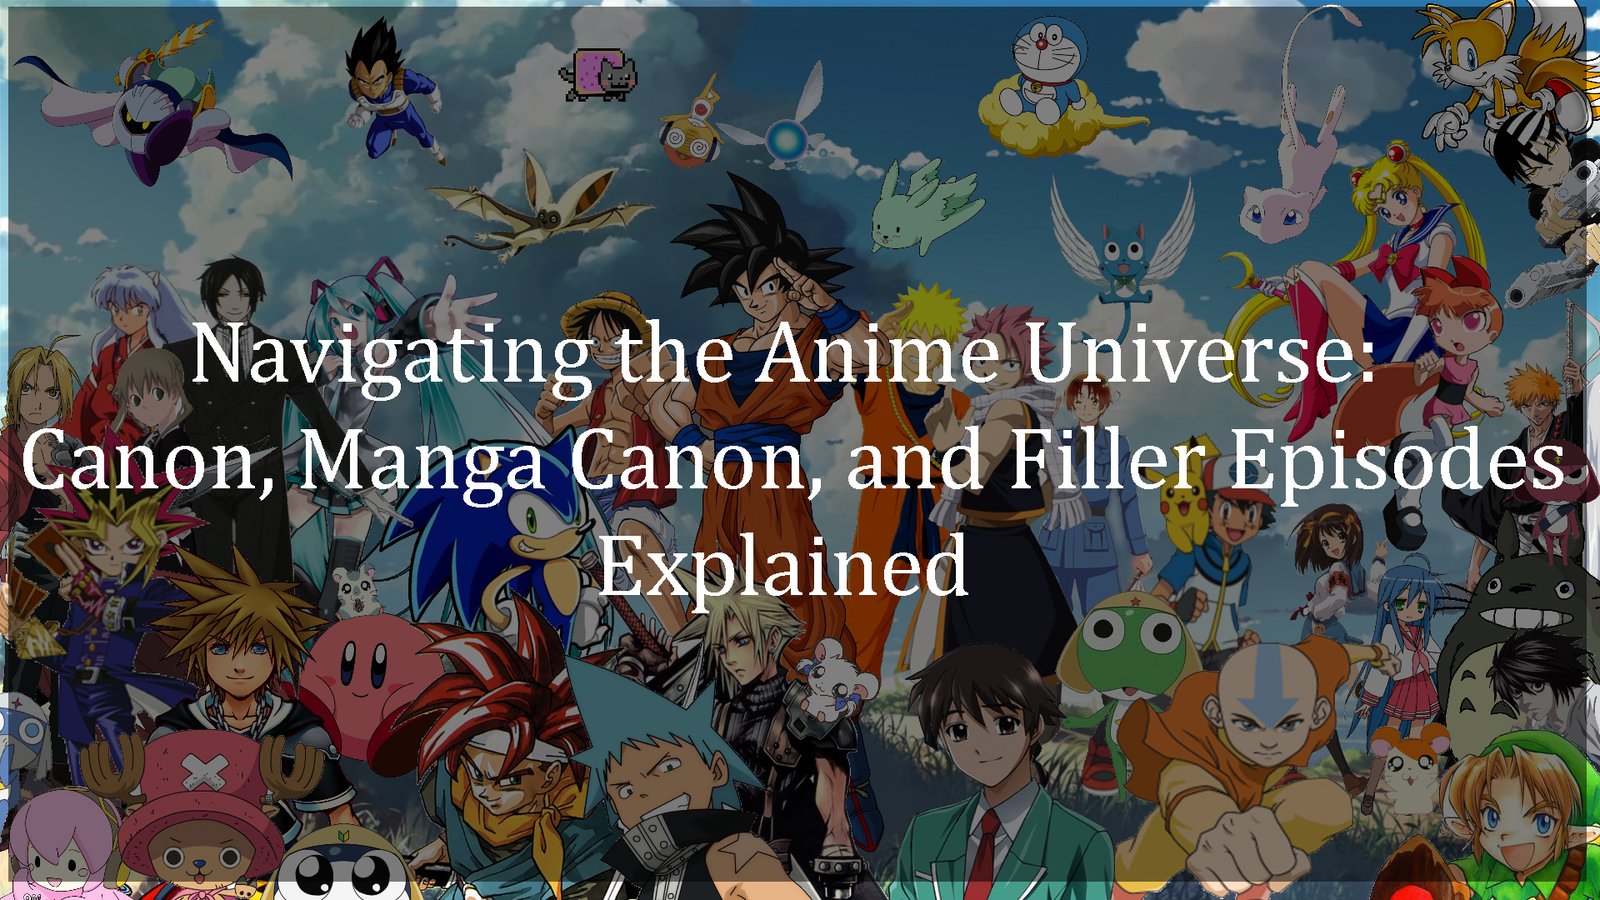 Navigating the Anime Universe: Canon, Manga Canon, and Filler Episodes Explained